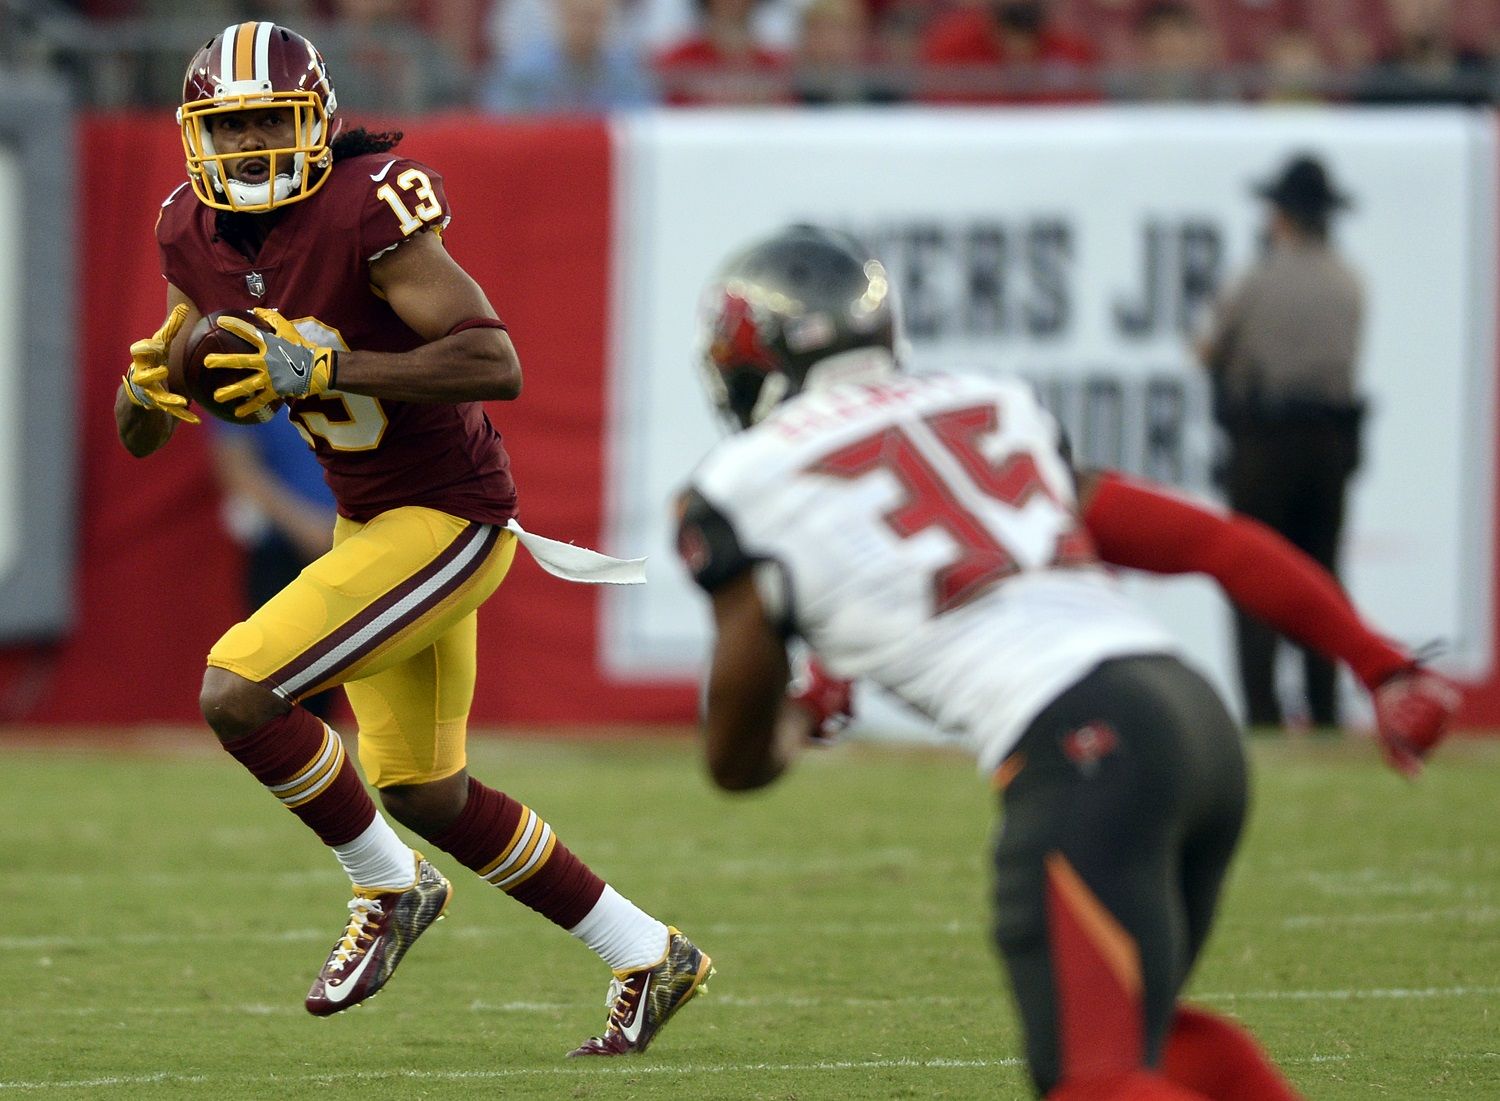 Washington Redskins wide receiver Maurice Harris (13) runs with the football after a reception against the Tampa Bay Buccaneers during the first quarter of an NFL preseason football game Thursday, Aug. 31, 2017, in Tampa, Fla. (AP Photo/Jason Behnken)